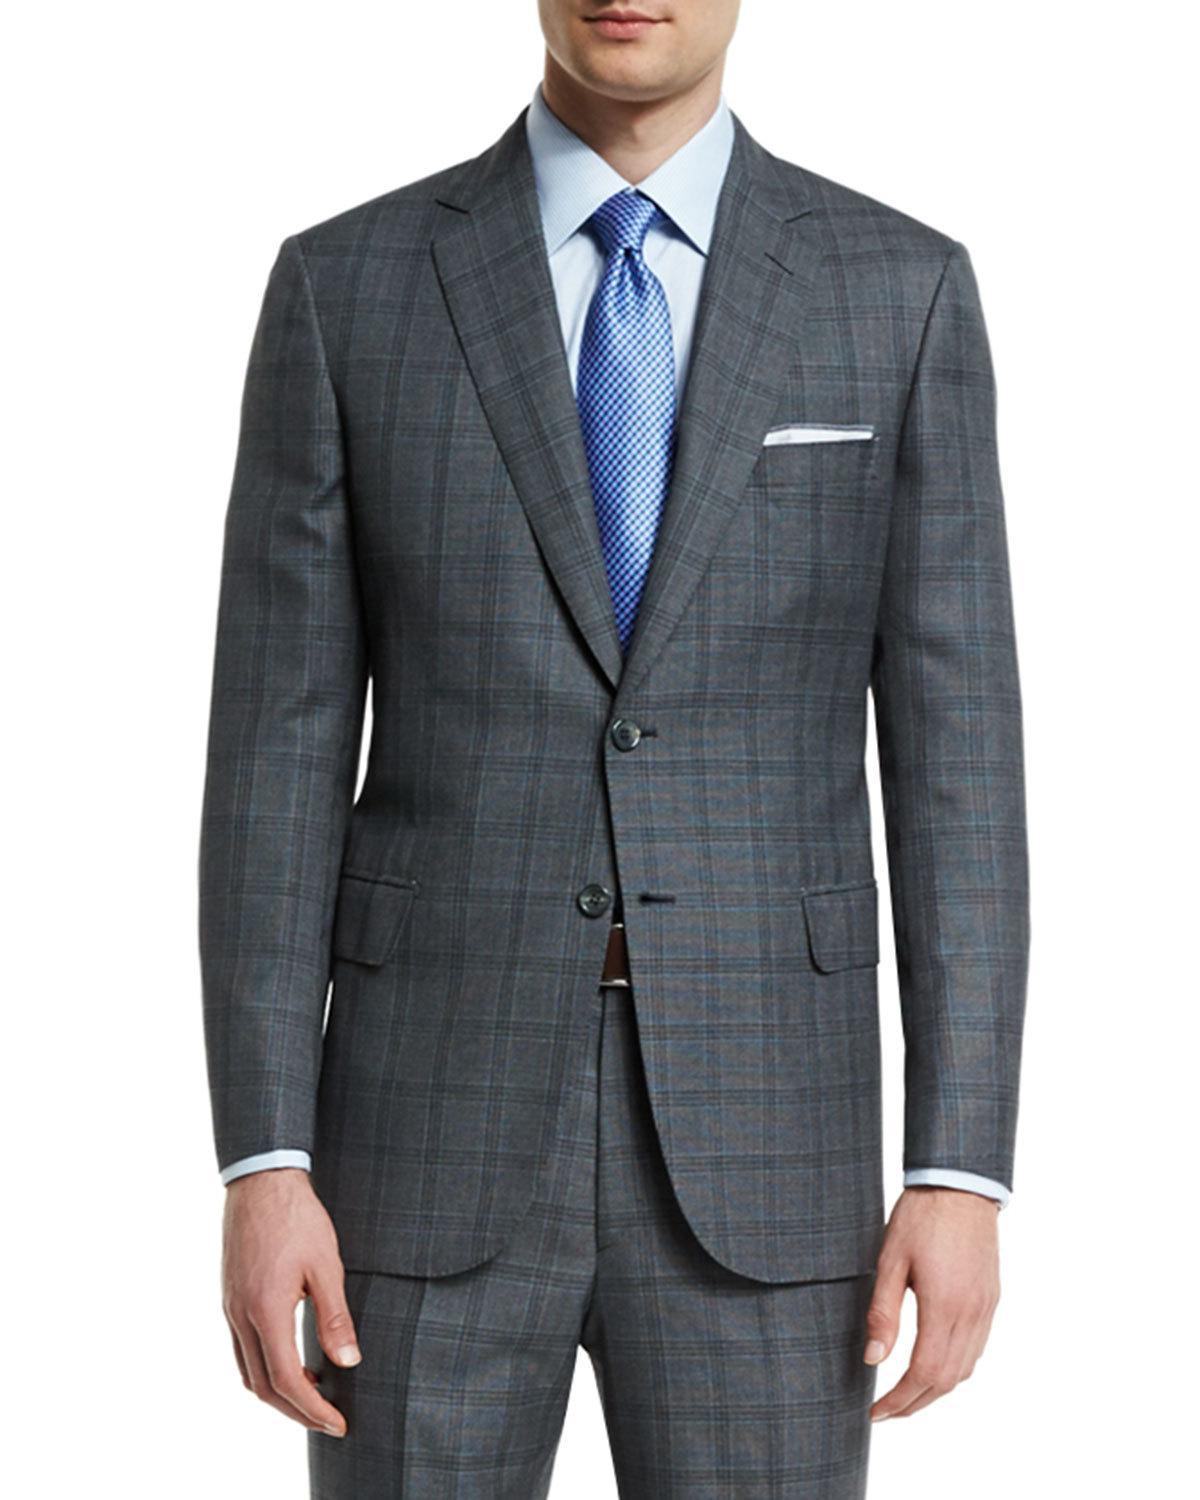 Brioni Birdseye Plaid Two-button Wool Suit in Gray for Men - Lyst